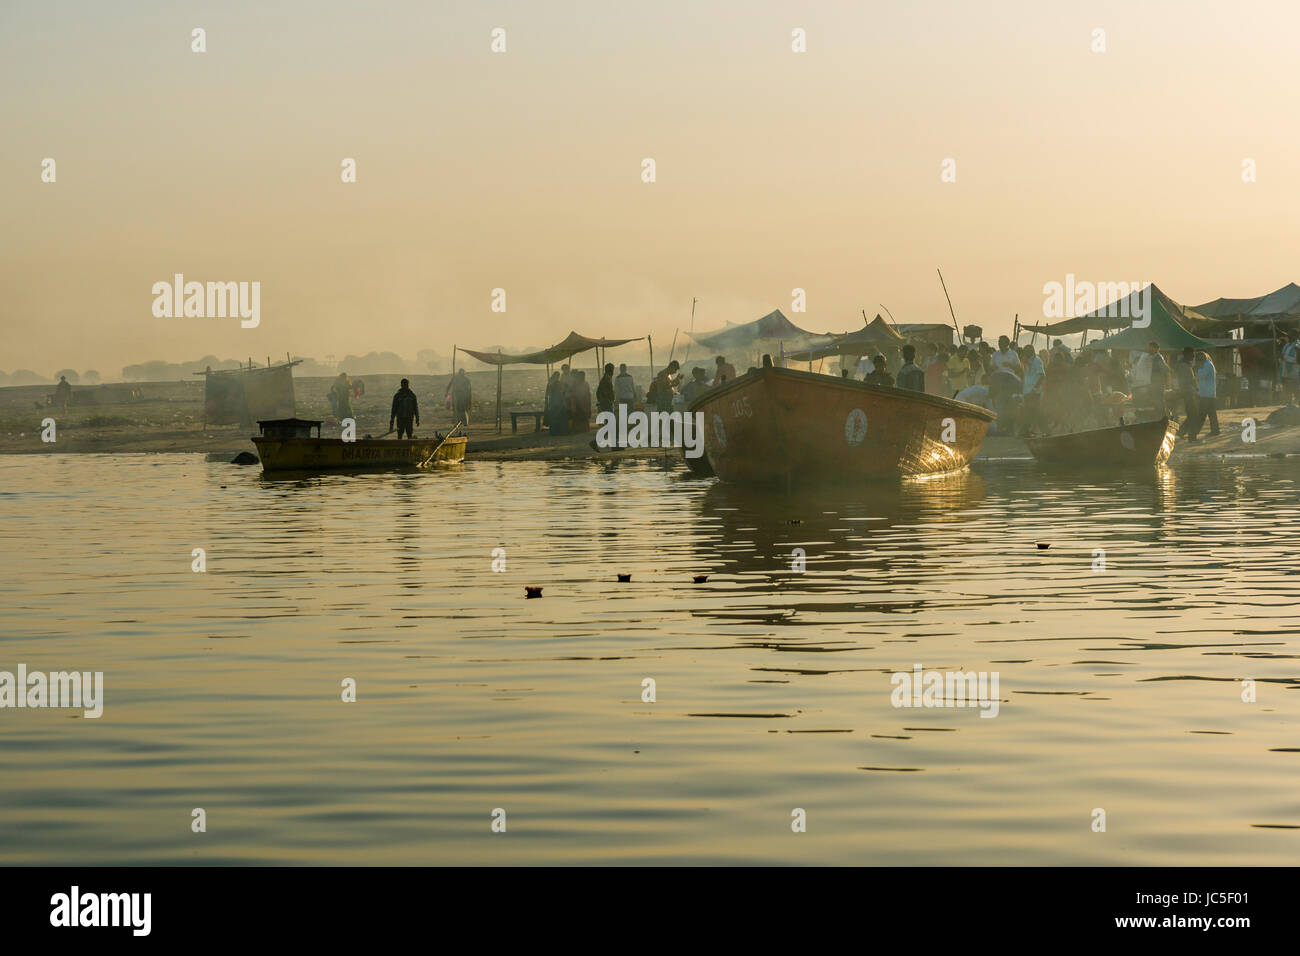 Morning fog is covering boats and pilgrims on the sand banks at the holy river Ganges Stock Photo